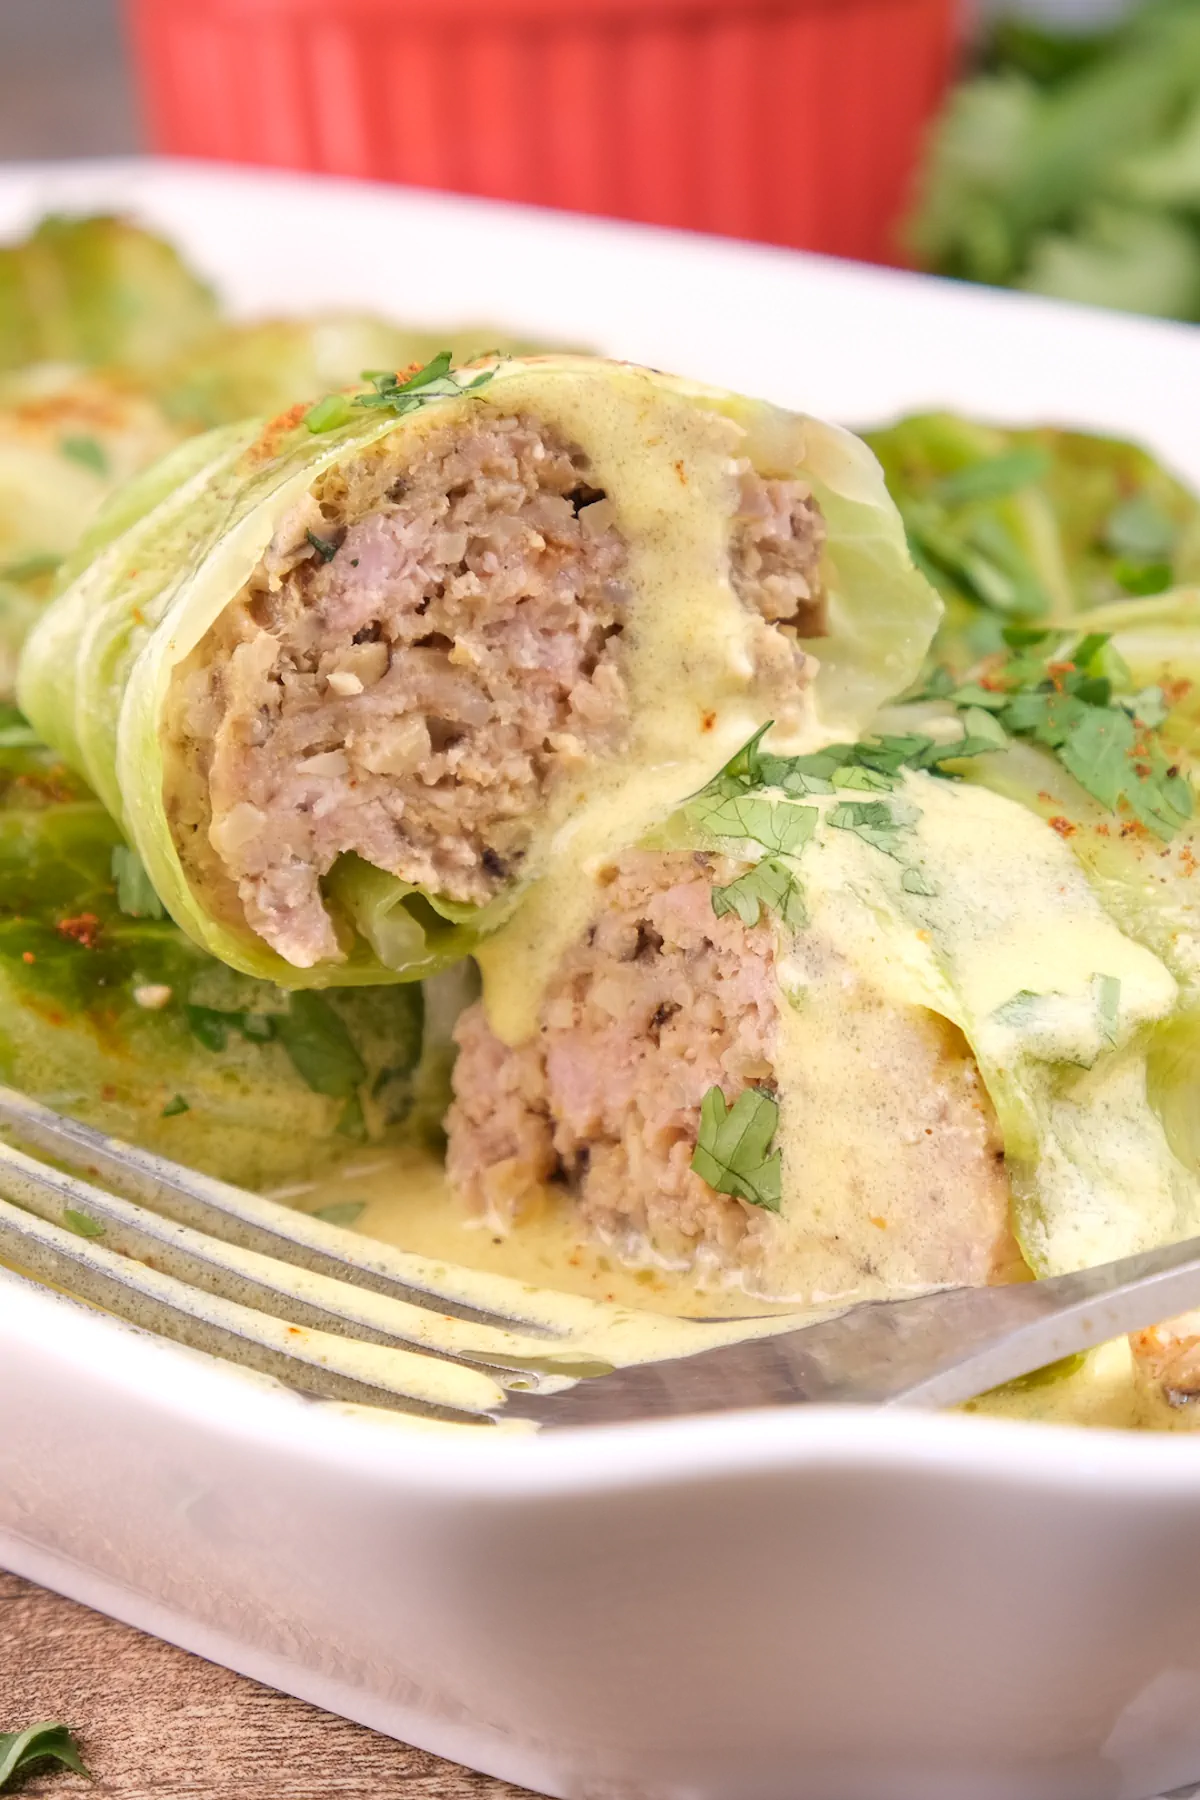 An up-close view of keto cabbage rolls that have been sliced, revealing the pork stuffing.